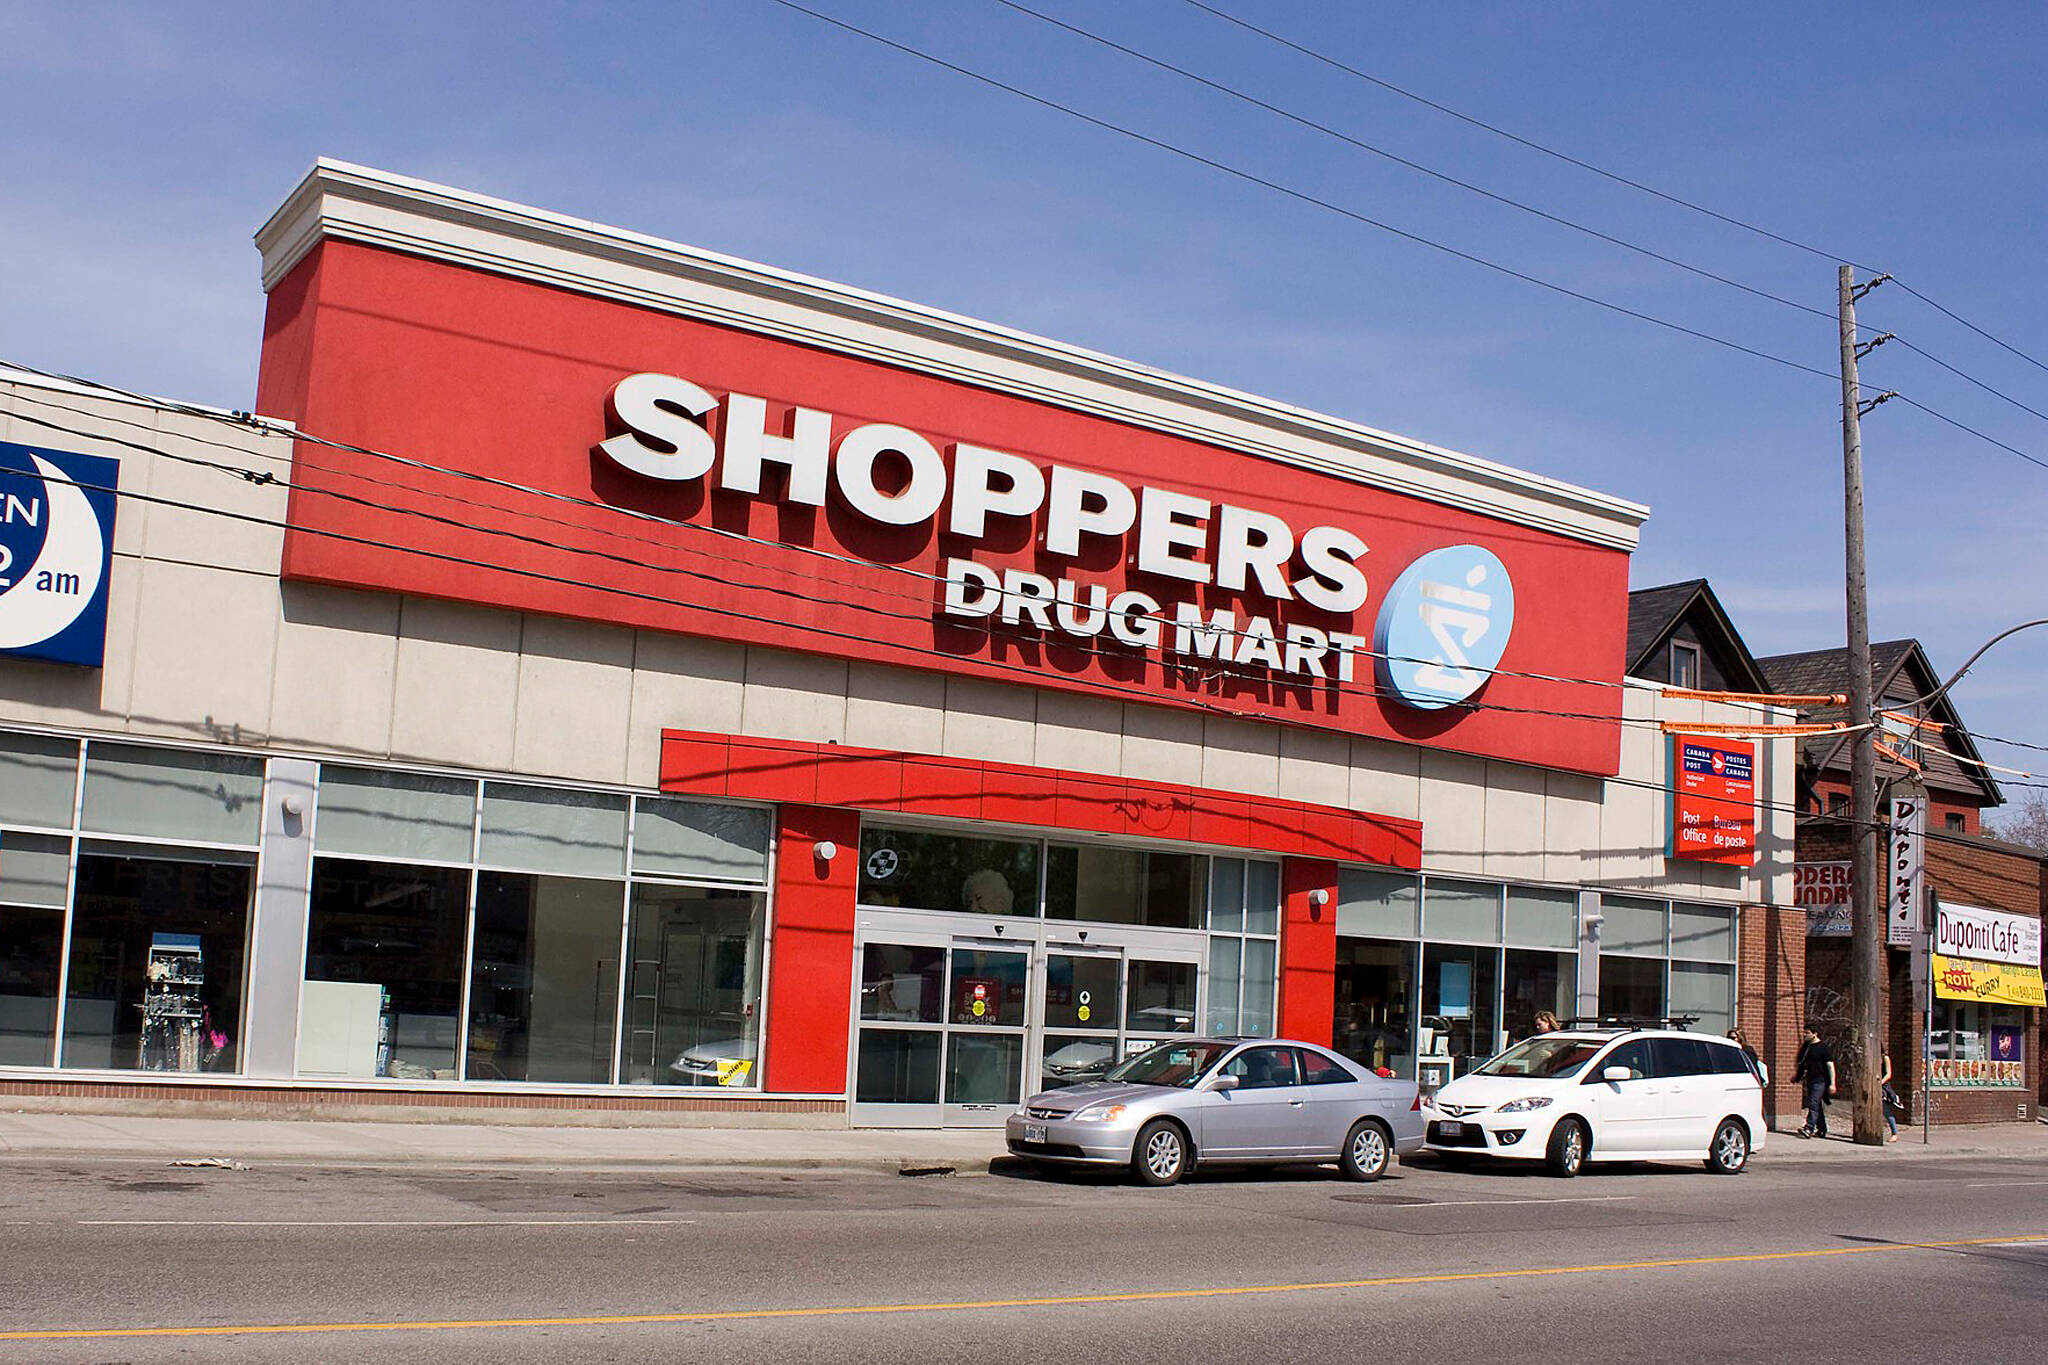 Shoppers Drug Mart reports 9 cases of COVID-19 among employees in